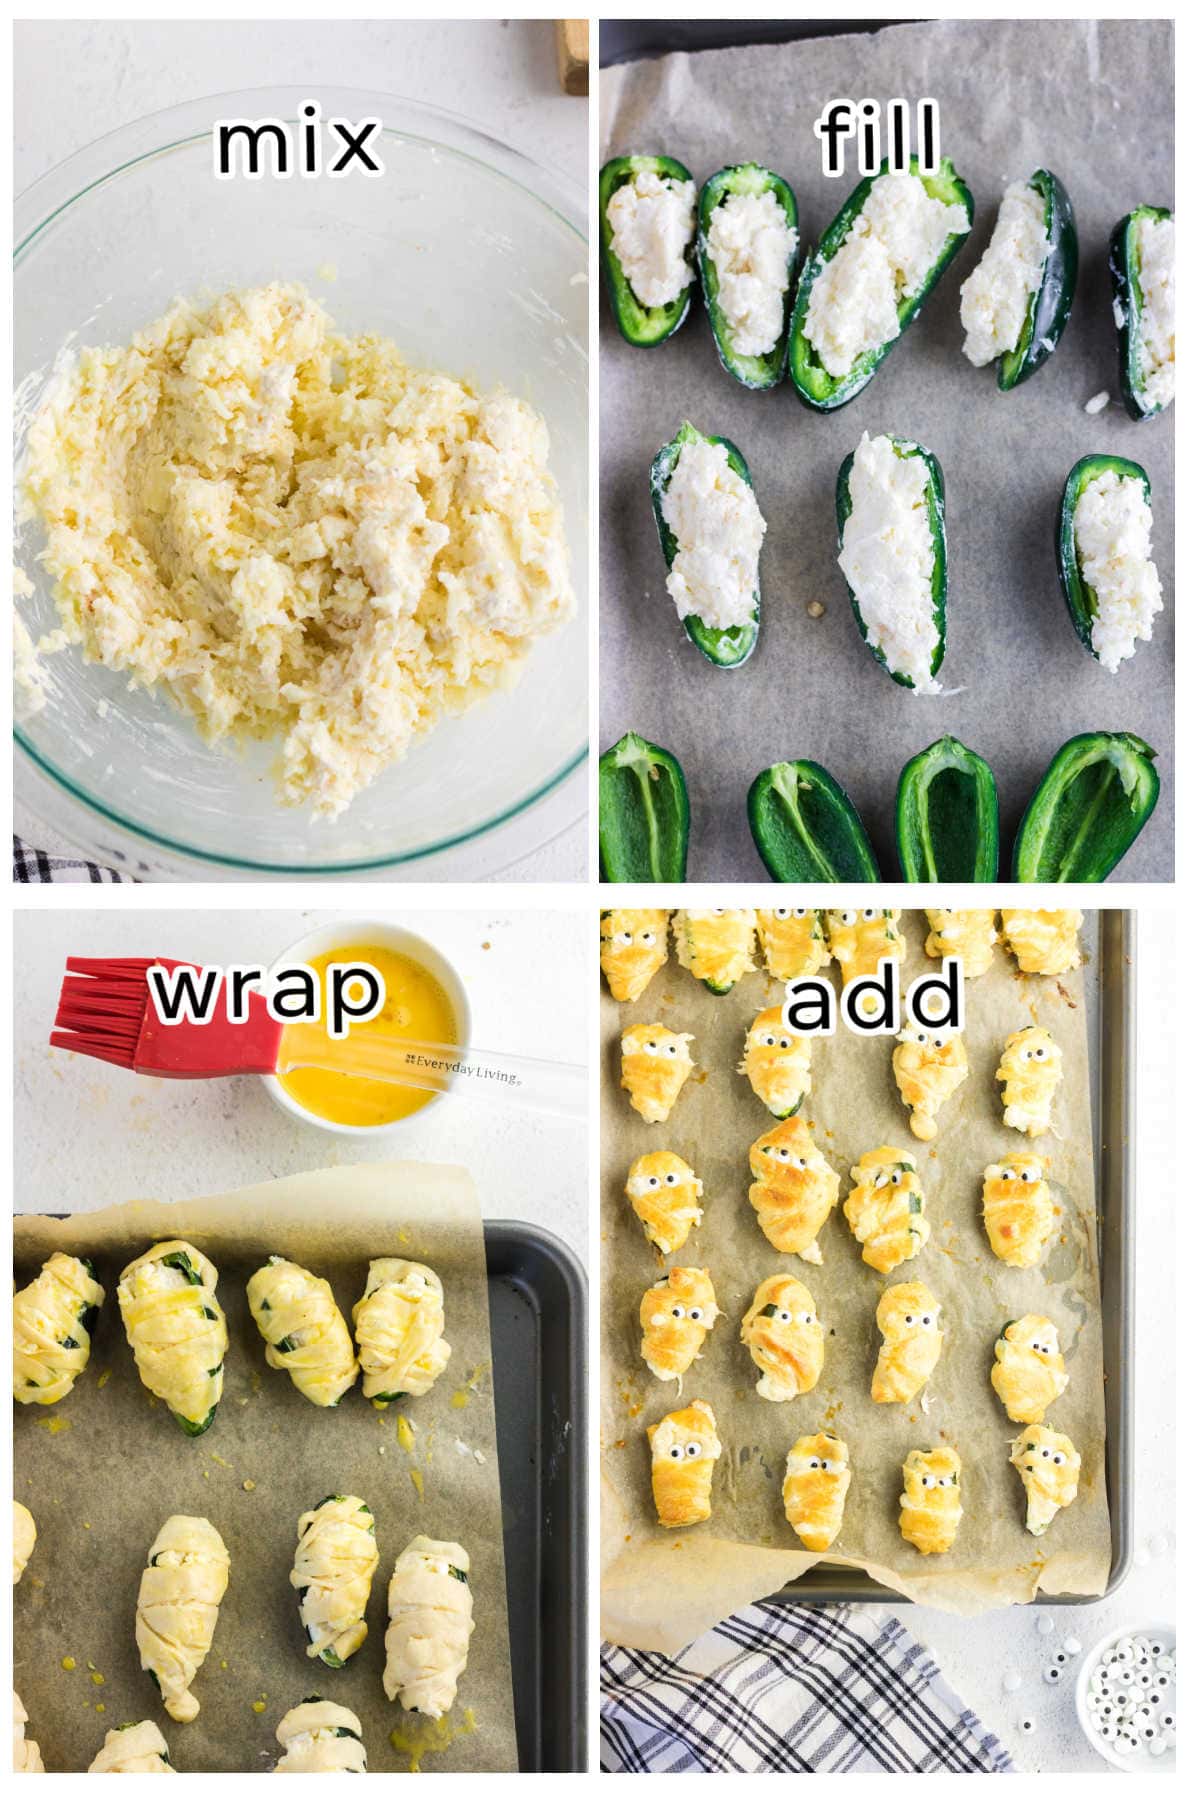 Step by step images showing how to make jalapeno poppers.